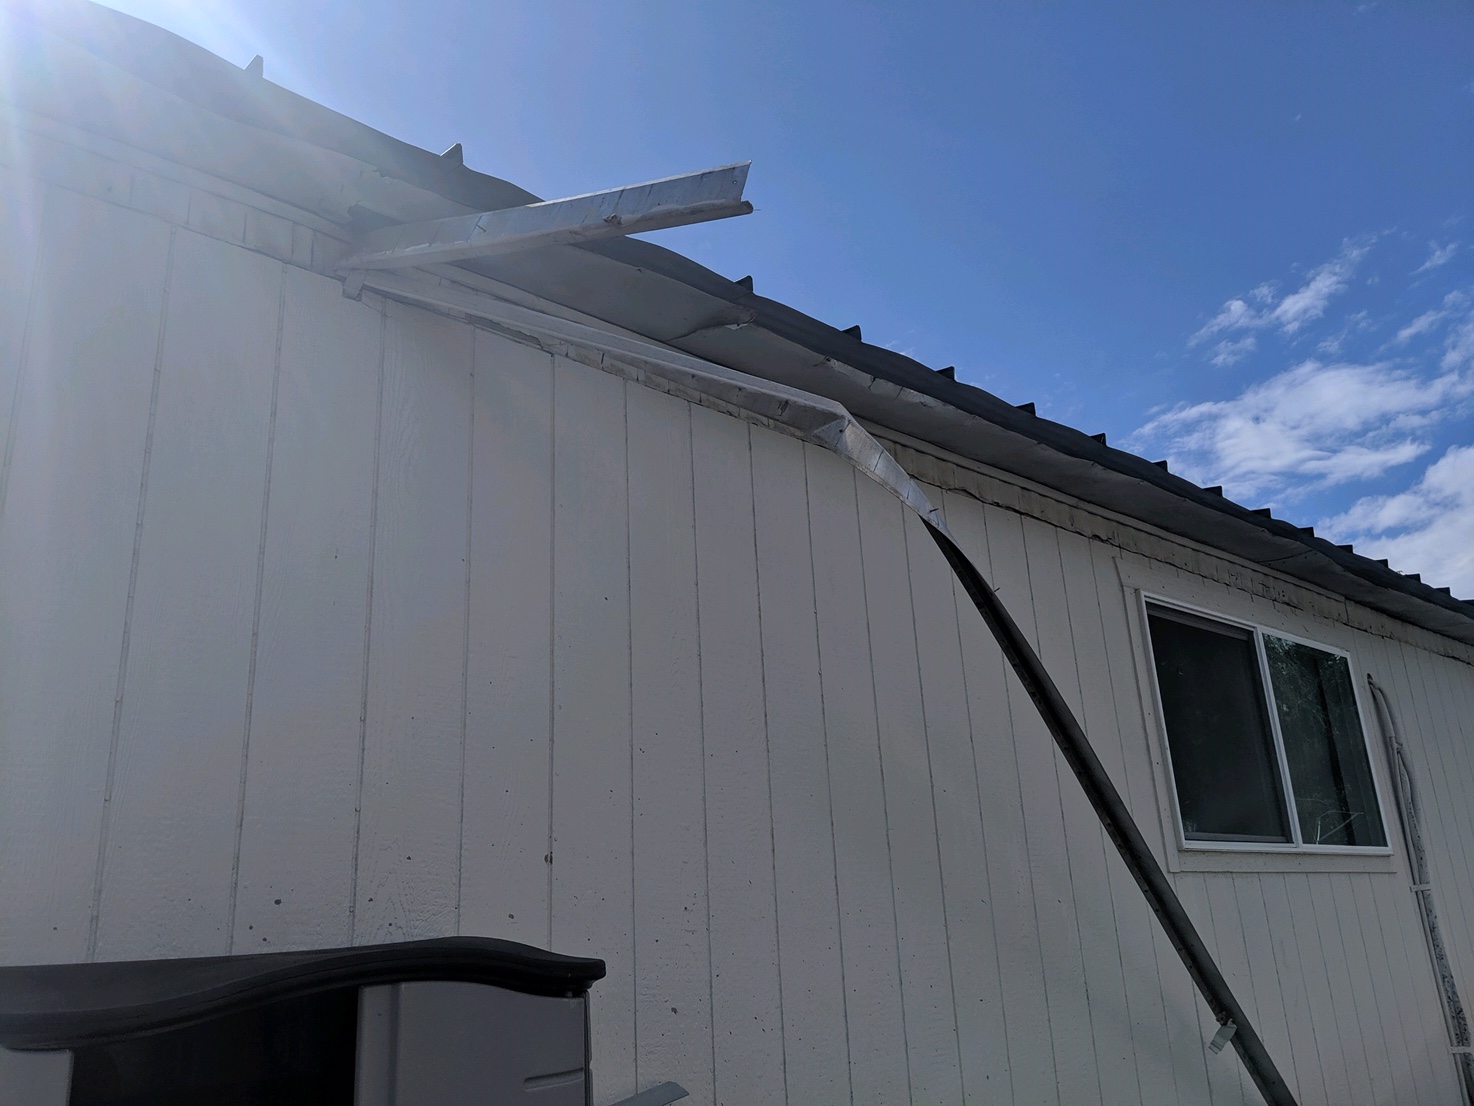 The awning of a mobile home was separated from the main structure